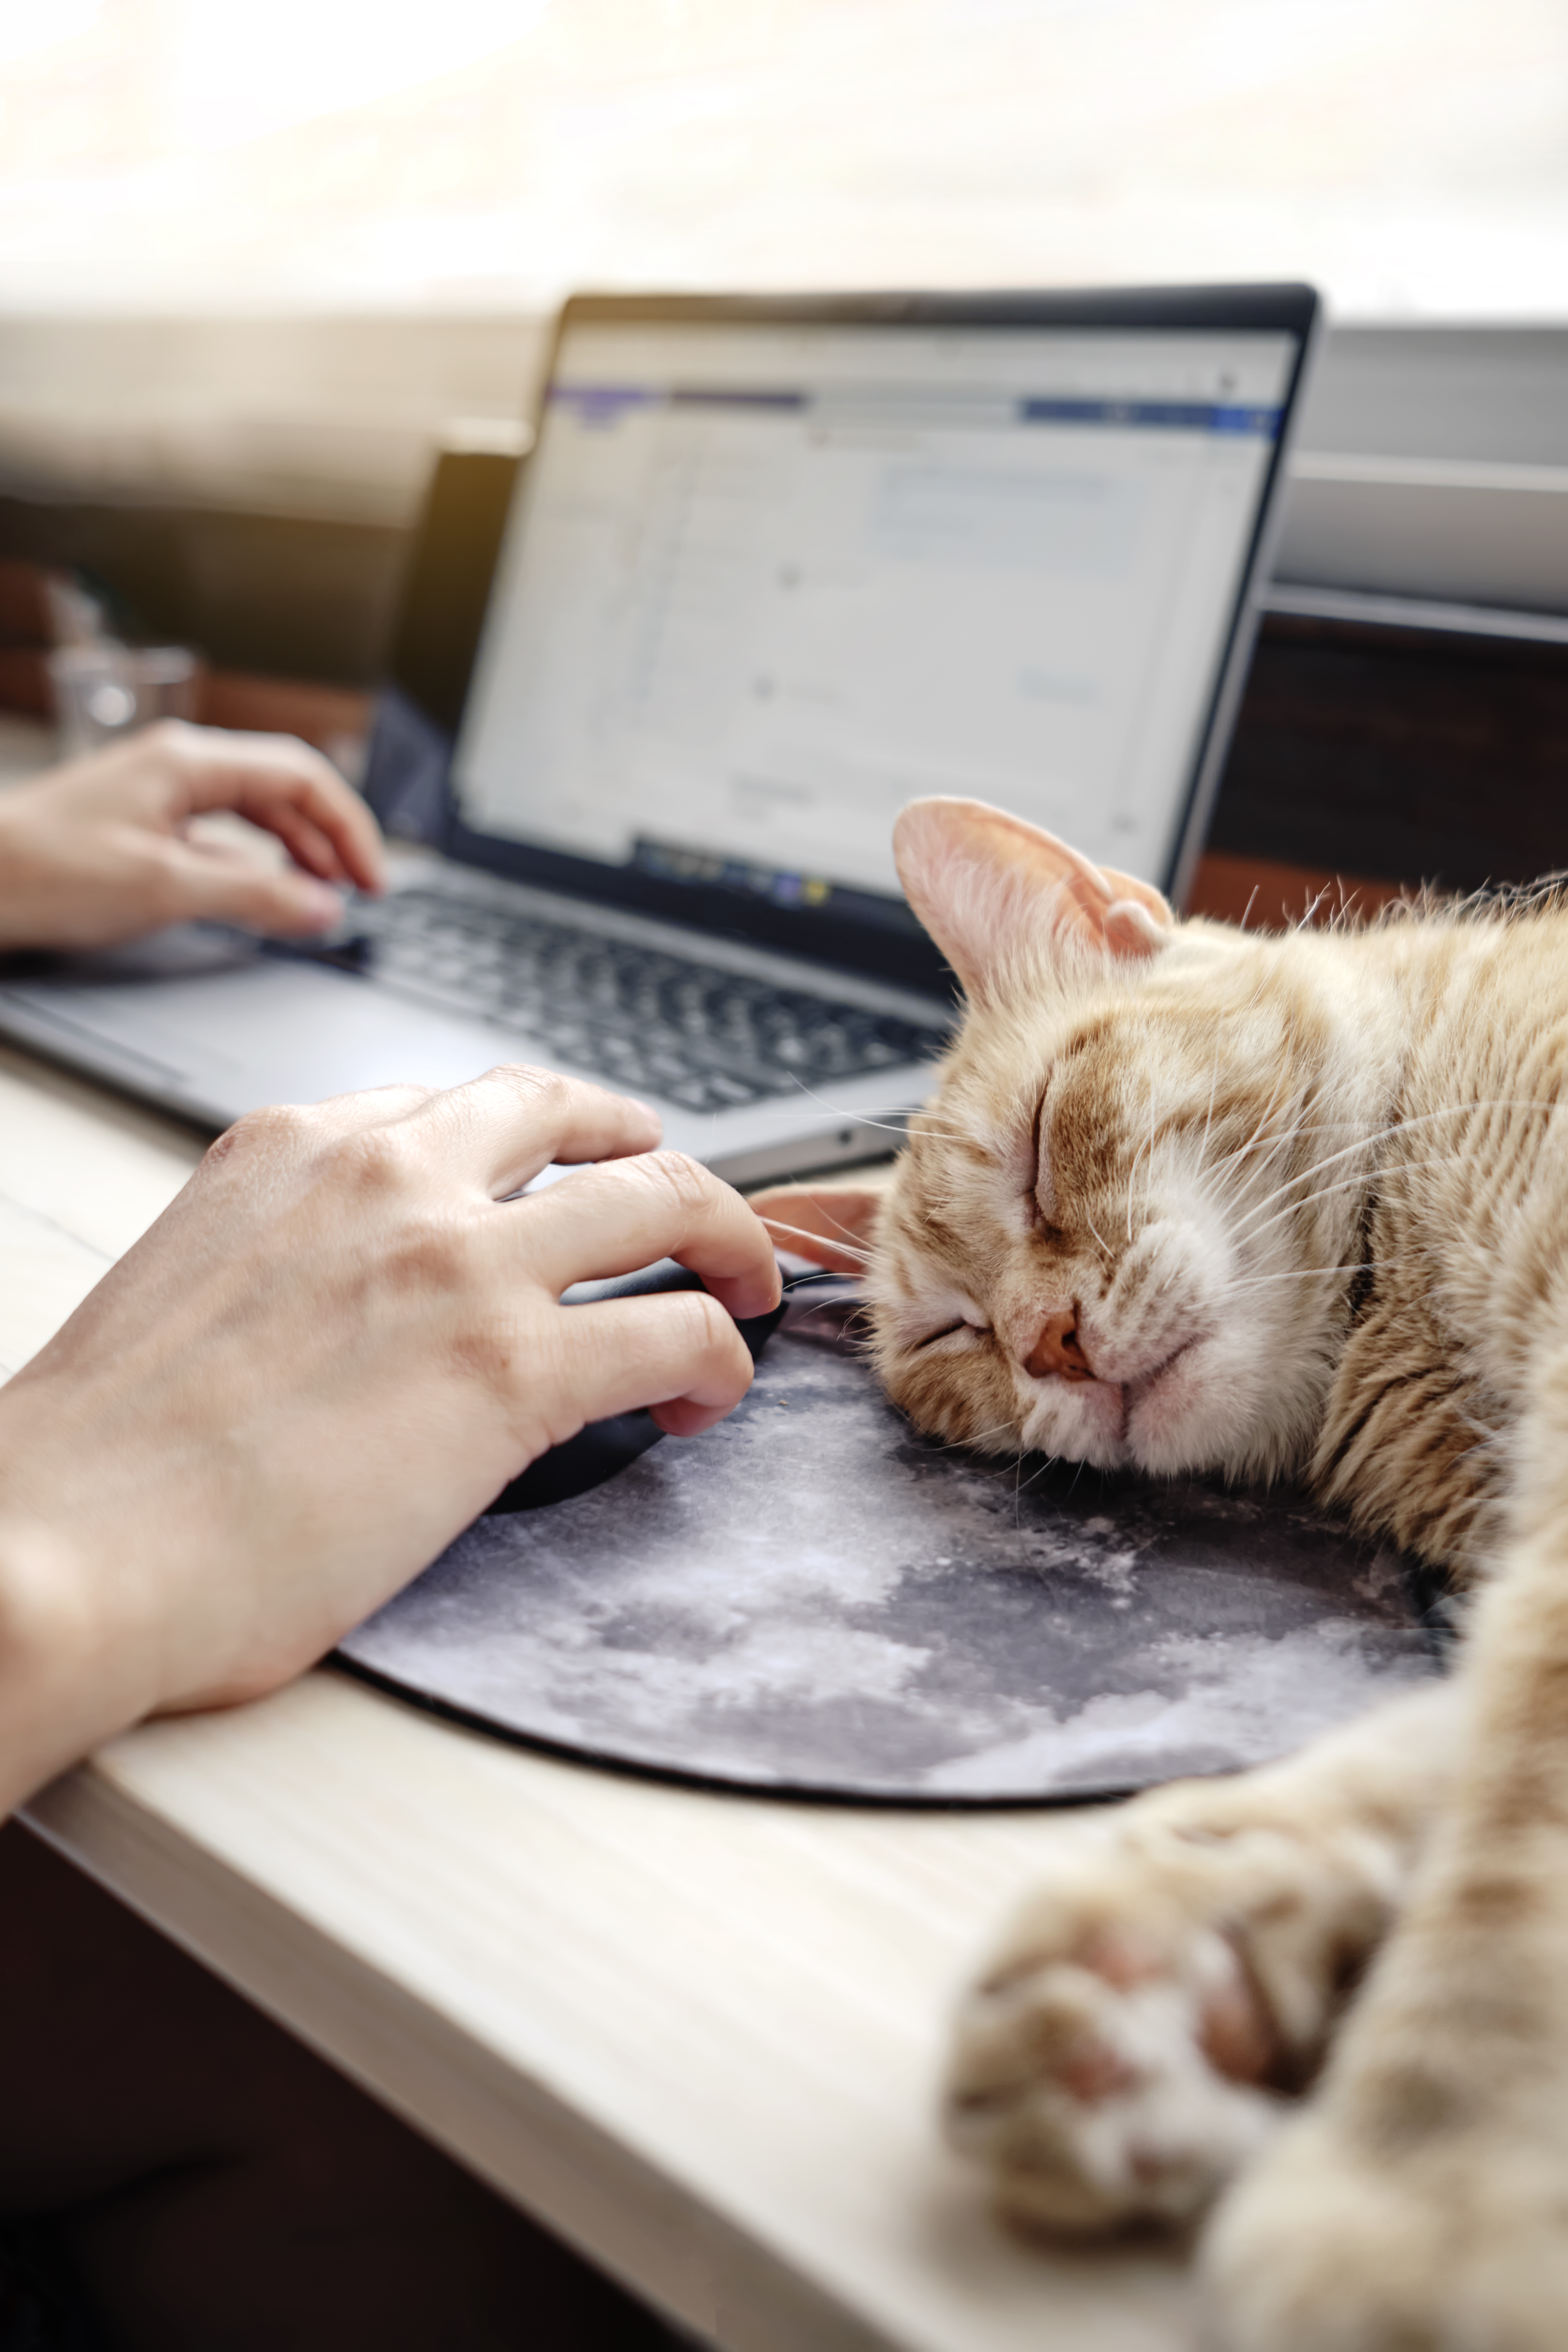 A survey revealed 37 per cent of owners said their cat often hampers work